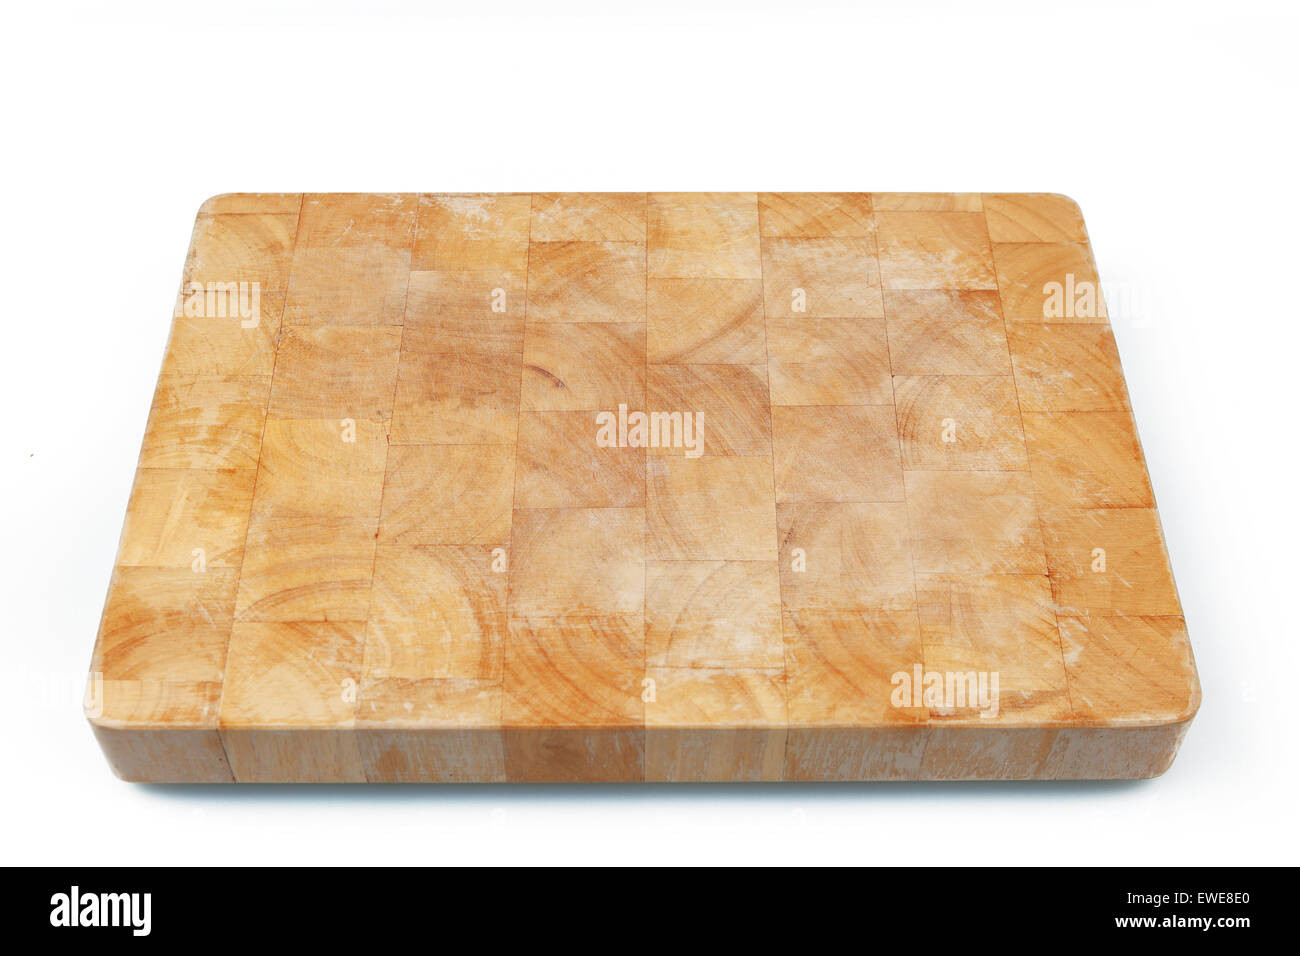 Wooden used cutting board on white background. Stock Photo